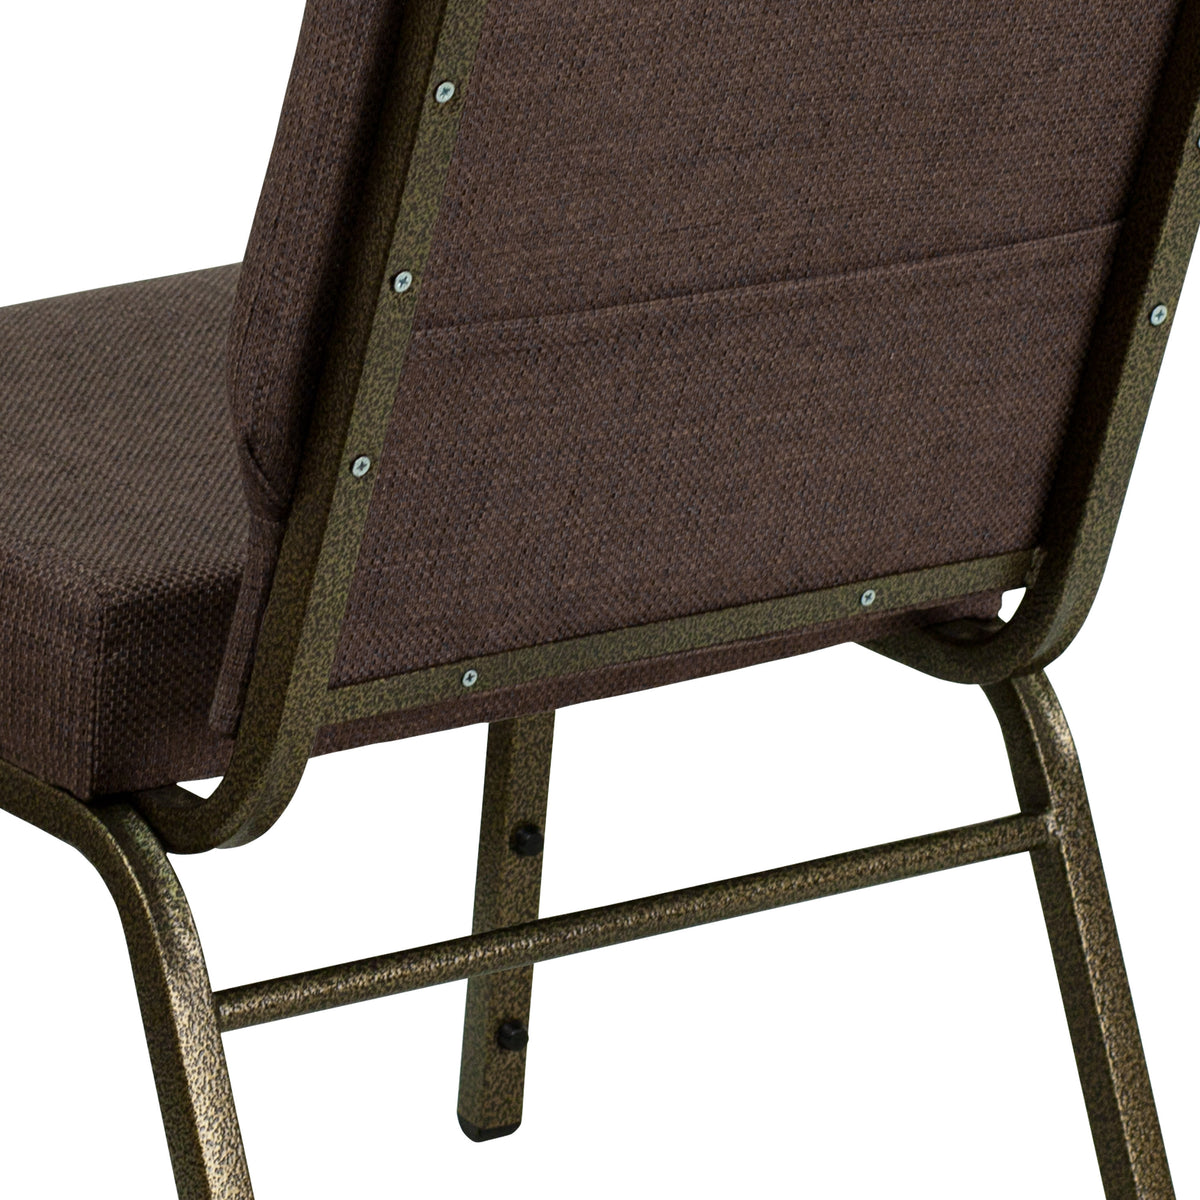 Stacking Auditorium Chair with 21inch Seat - Brown Fabric/Silver Vein Frame